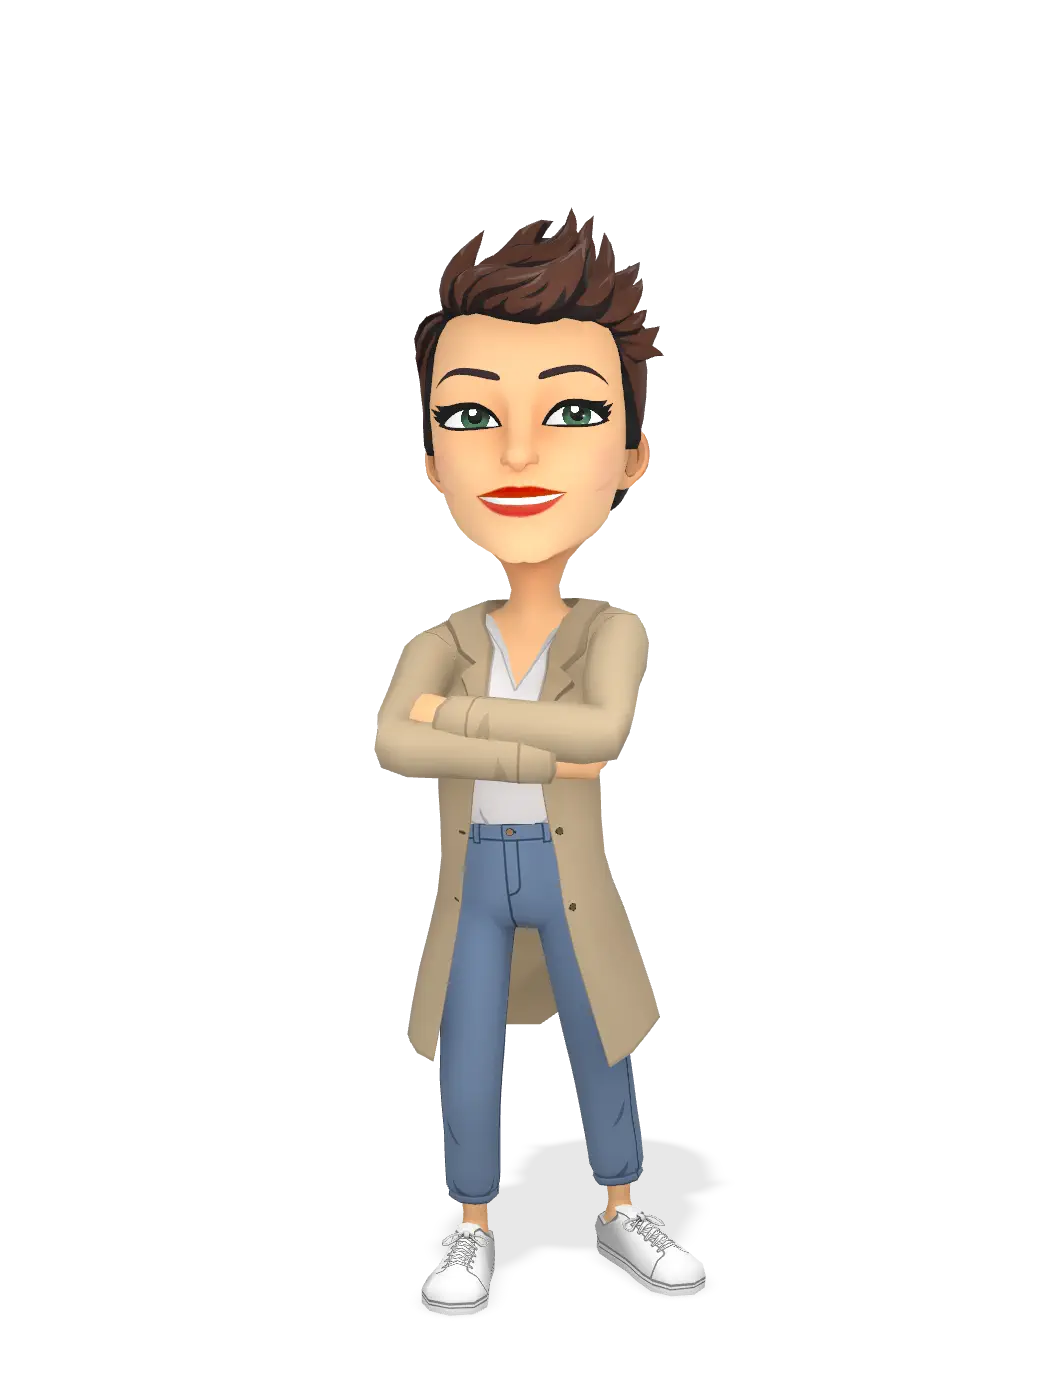 3D Bitmoji for frenchictouch